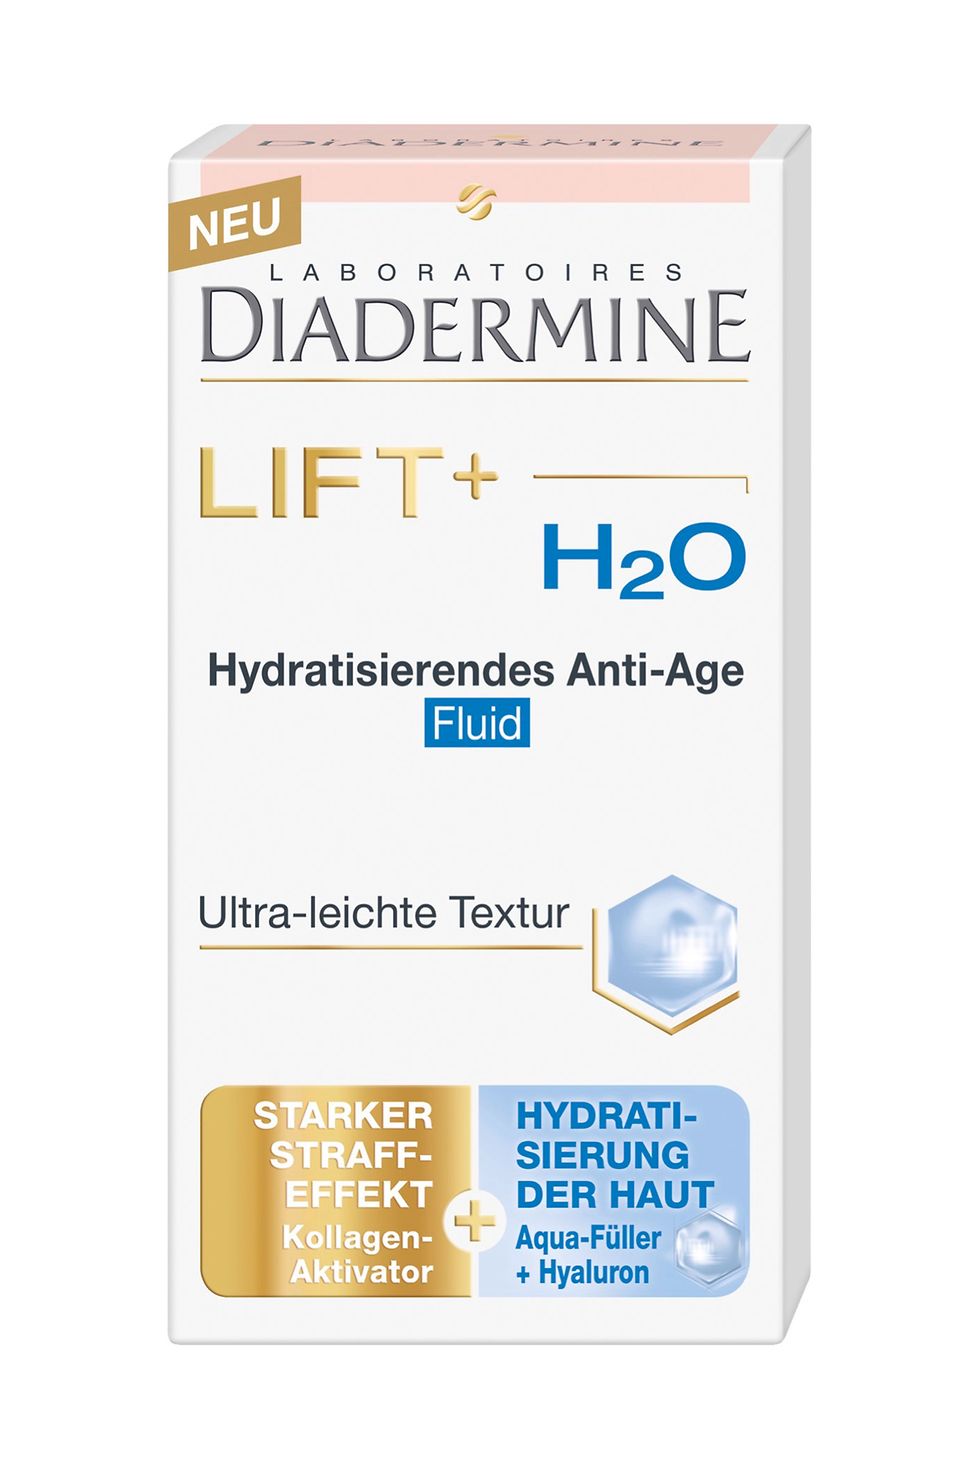 Diadermine Lift+ H2O Hydratisierendes Anti-Age Fluid